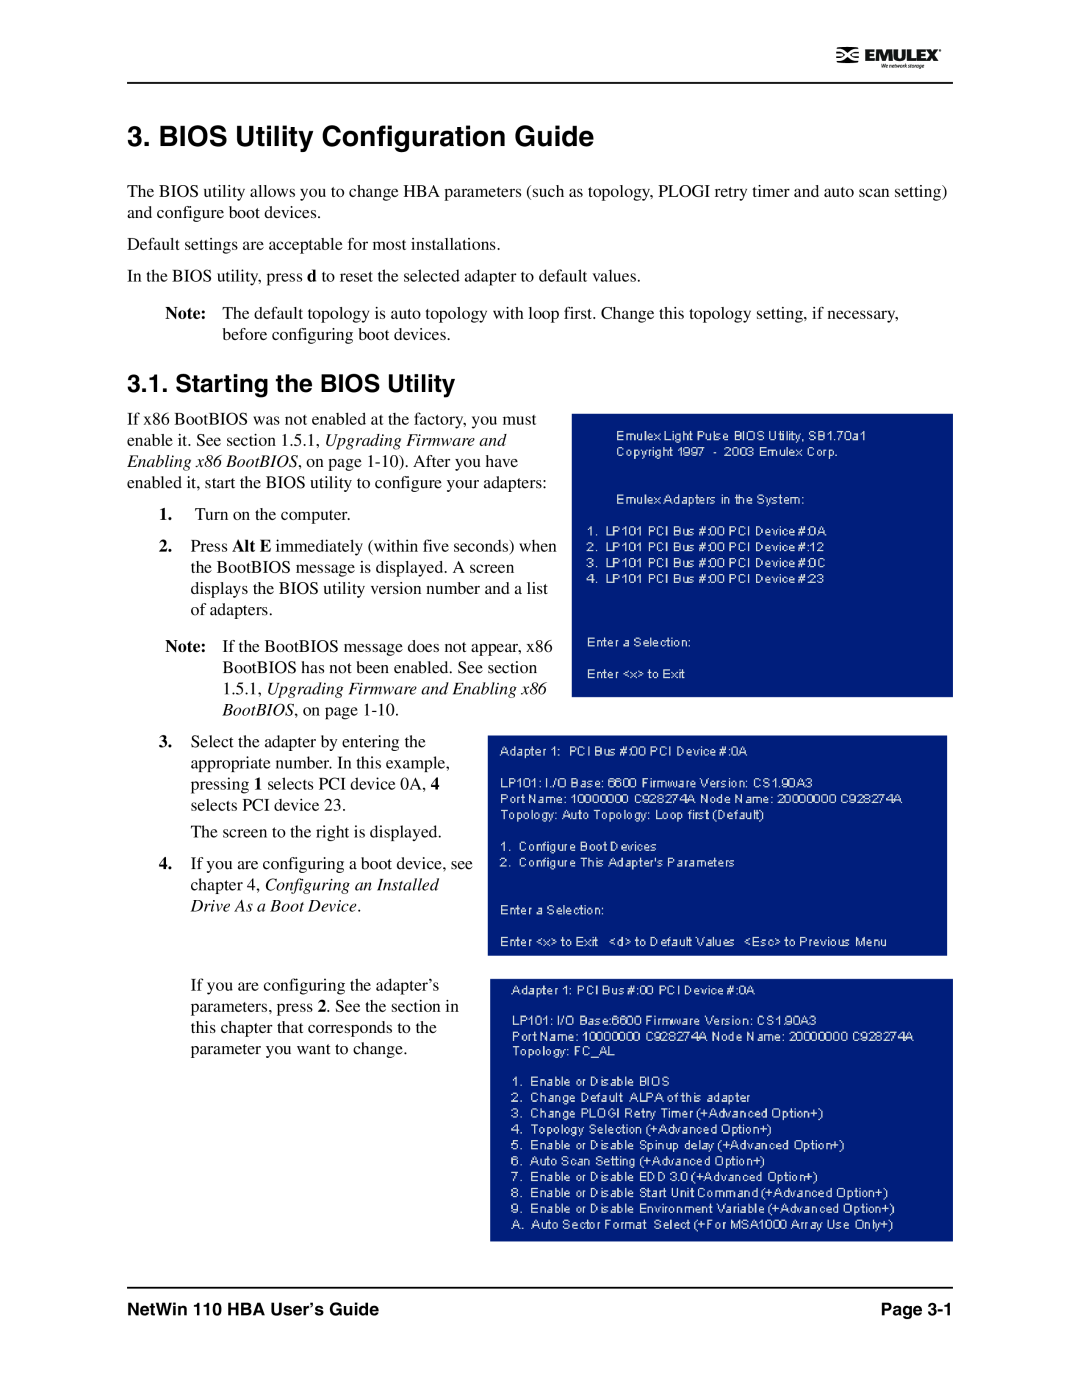 Emulex manual BIOS Utility Configuration Guide, Starting the BIOS Utility, NetWin 110 HBA User’s Guide, Page 